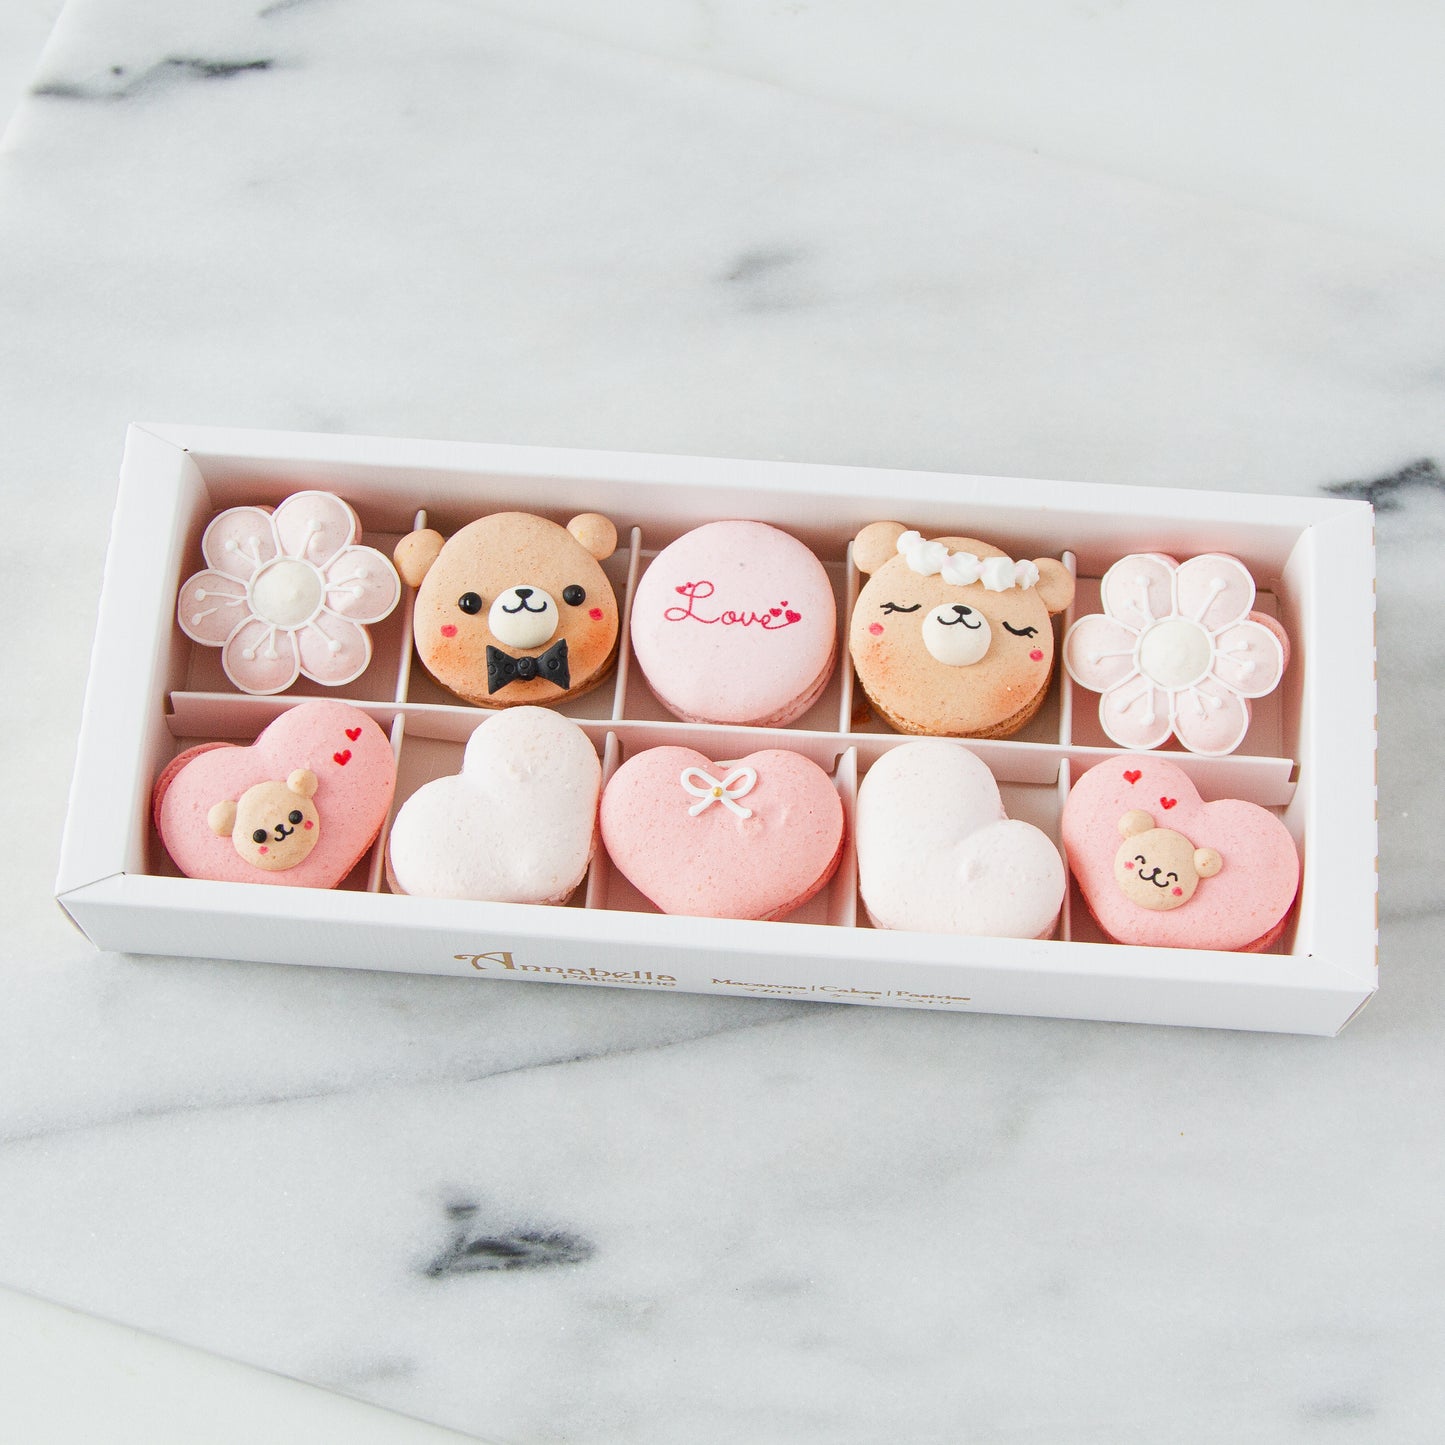 10 pcs Bear Couple Macarons in a Gift Box | Complimentary Ribbon and Personalised Message | $45.80 Nett